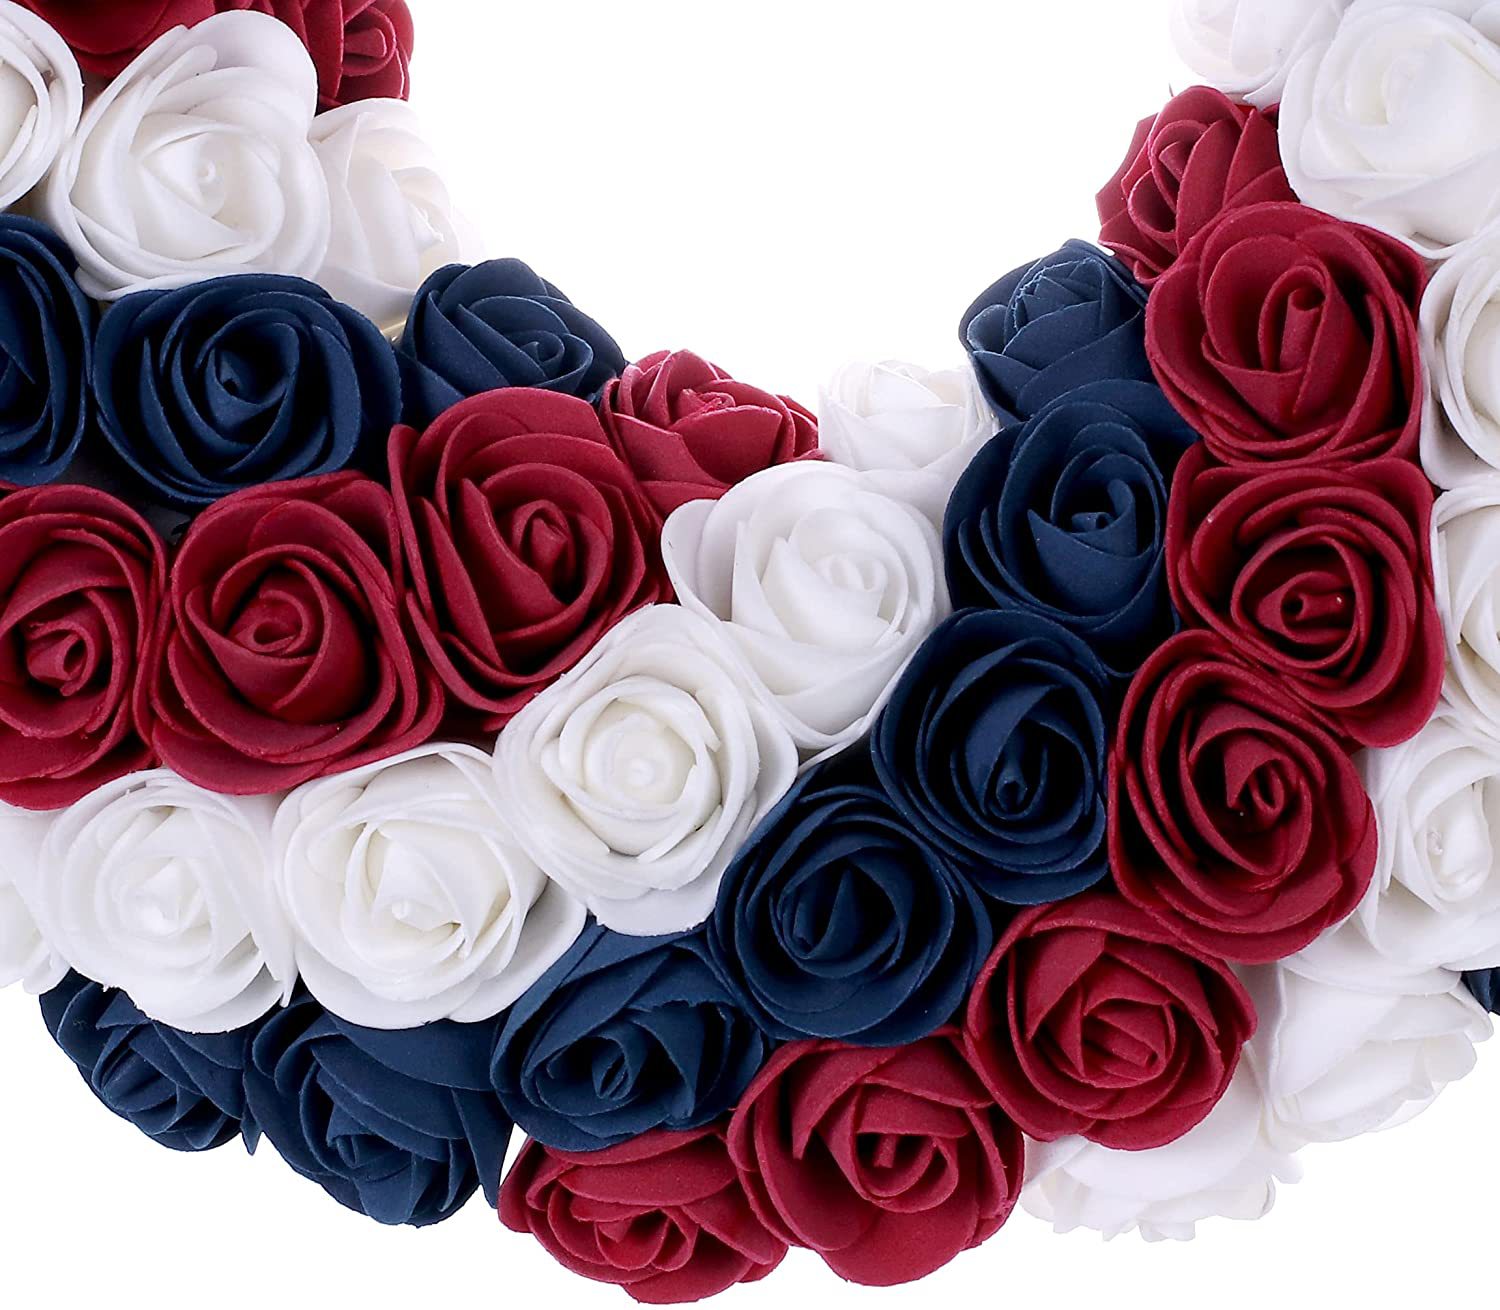 Red White And Blue Flowers For Independence Day Decoration Garland, 4th of July decorations, American flag decorations, Patriotic decorations, Red, white and blue decorations, July 4th wreaths, July 4th garlands, July 4th centerpieces, 